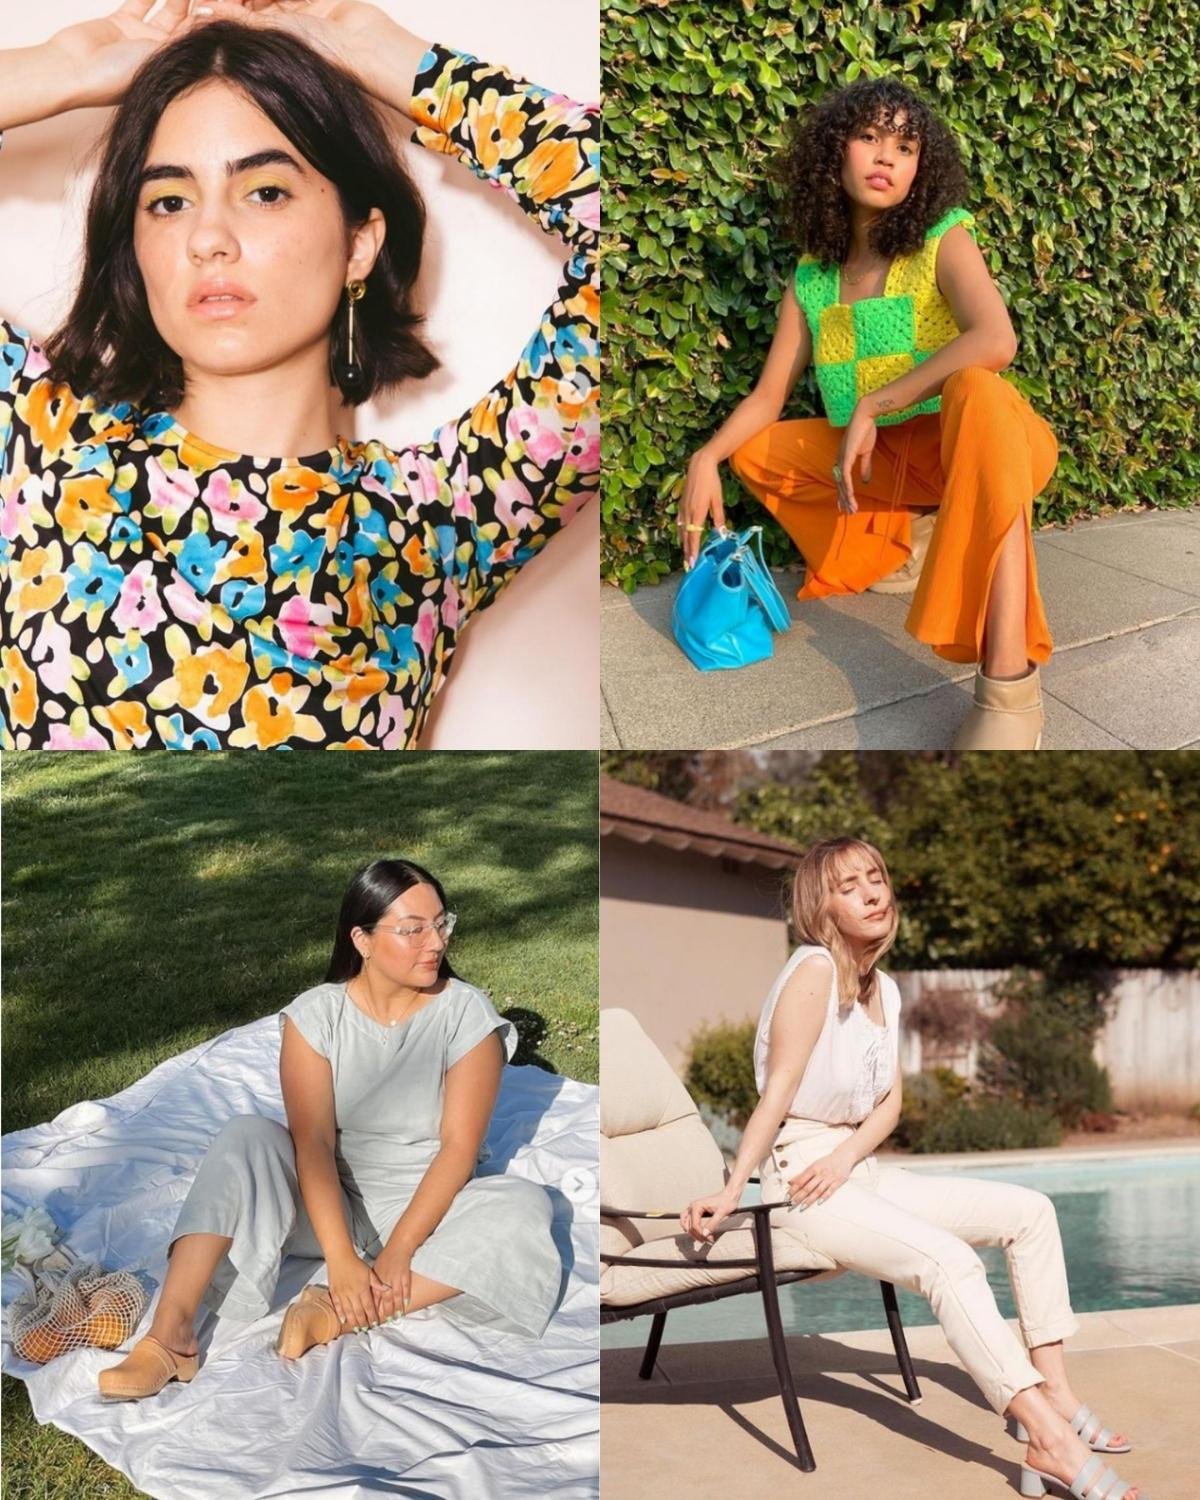 https://images.squarespace-cdn.com/content/v1/58163c29197aea6c5f166b6f/1635516865935-3DINYQIUBOTR357EDMBE/Latinx+Sustainable+Fashion+Influencers+to+Follow+-+CFC+PST+IMAGES.jpg